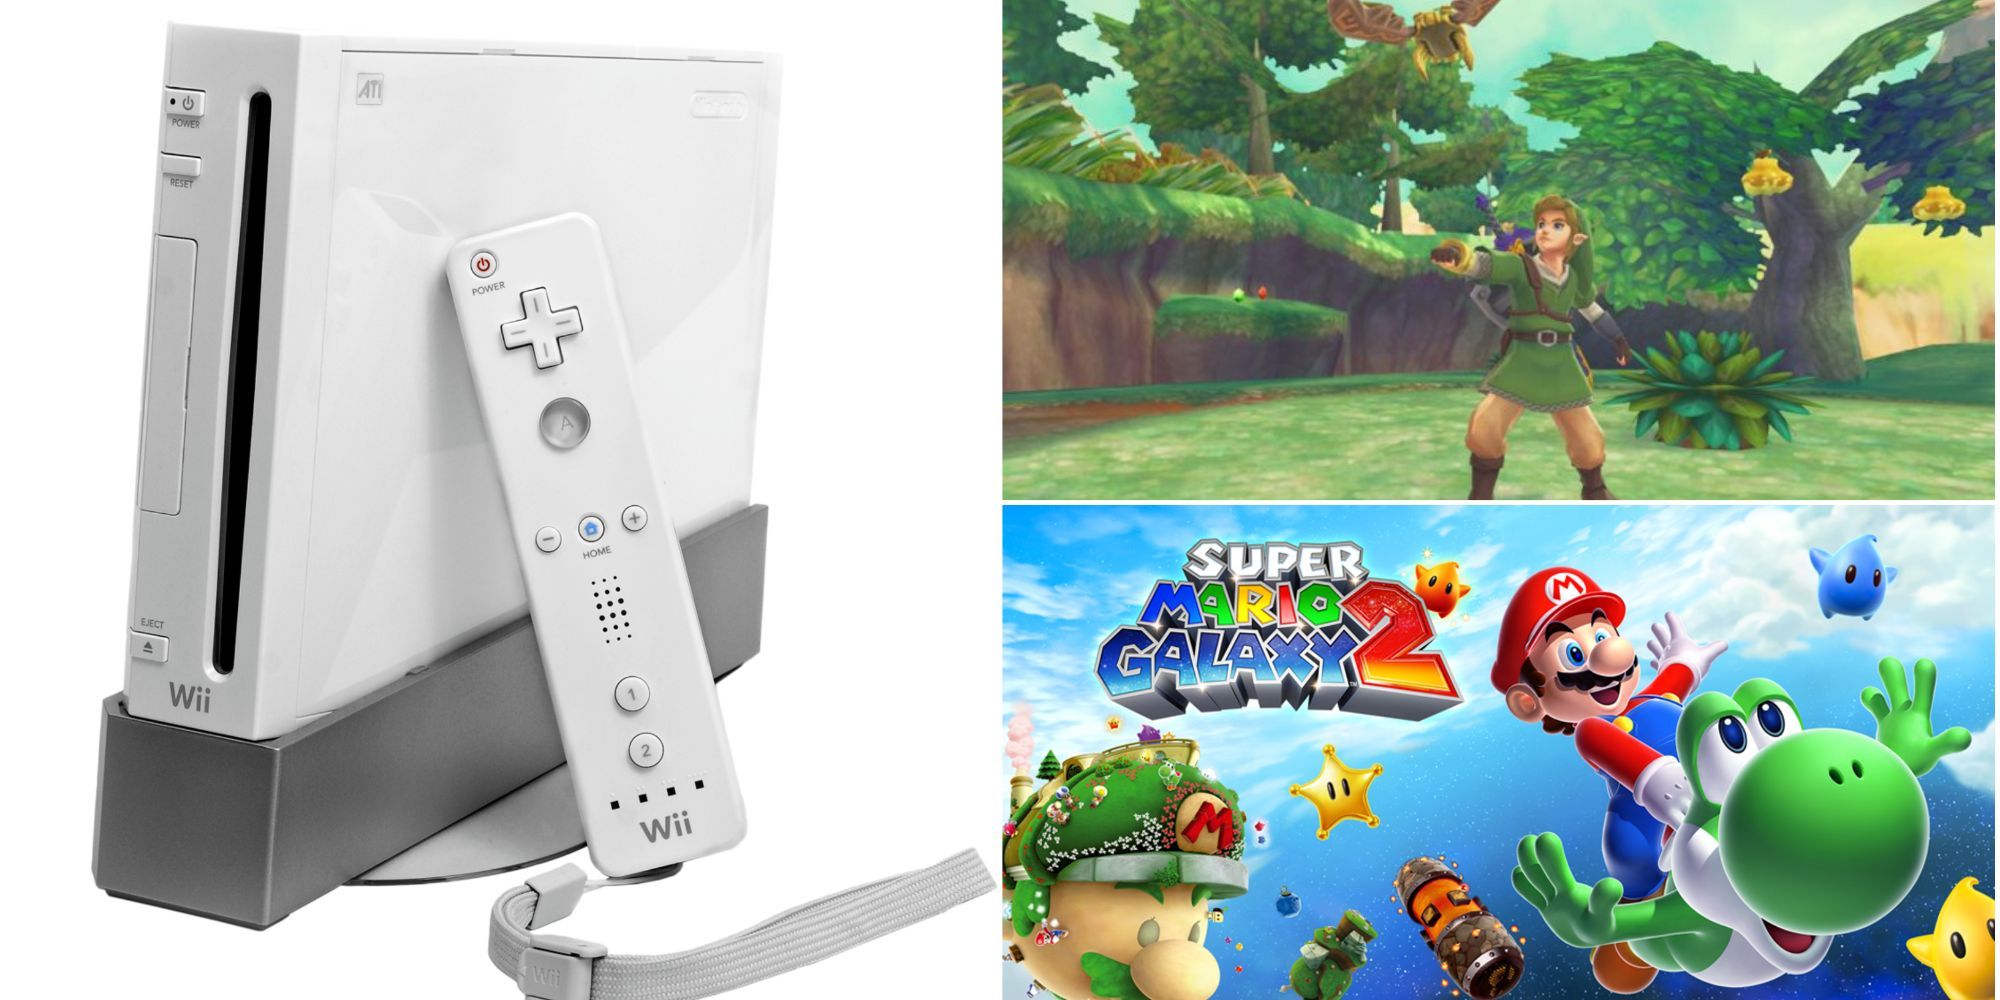 A Nintendo Wii beside some of its iconic titles, Super Mario Galaxy 2 and a shot of Link in a forest from Skyward Sword